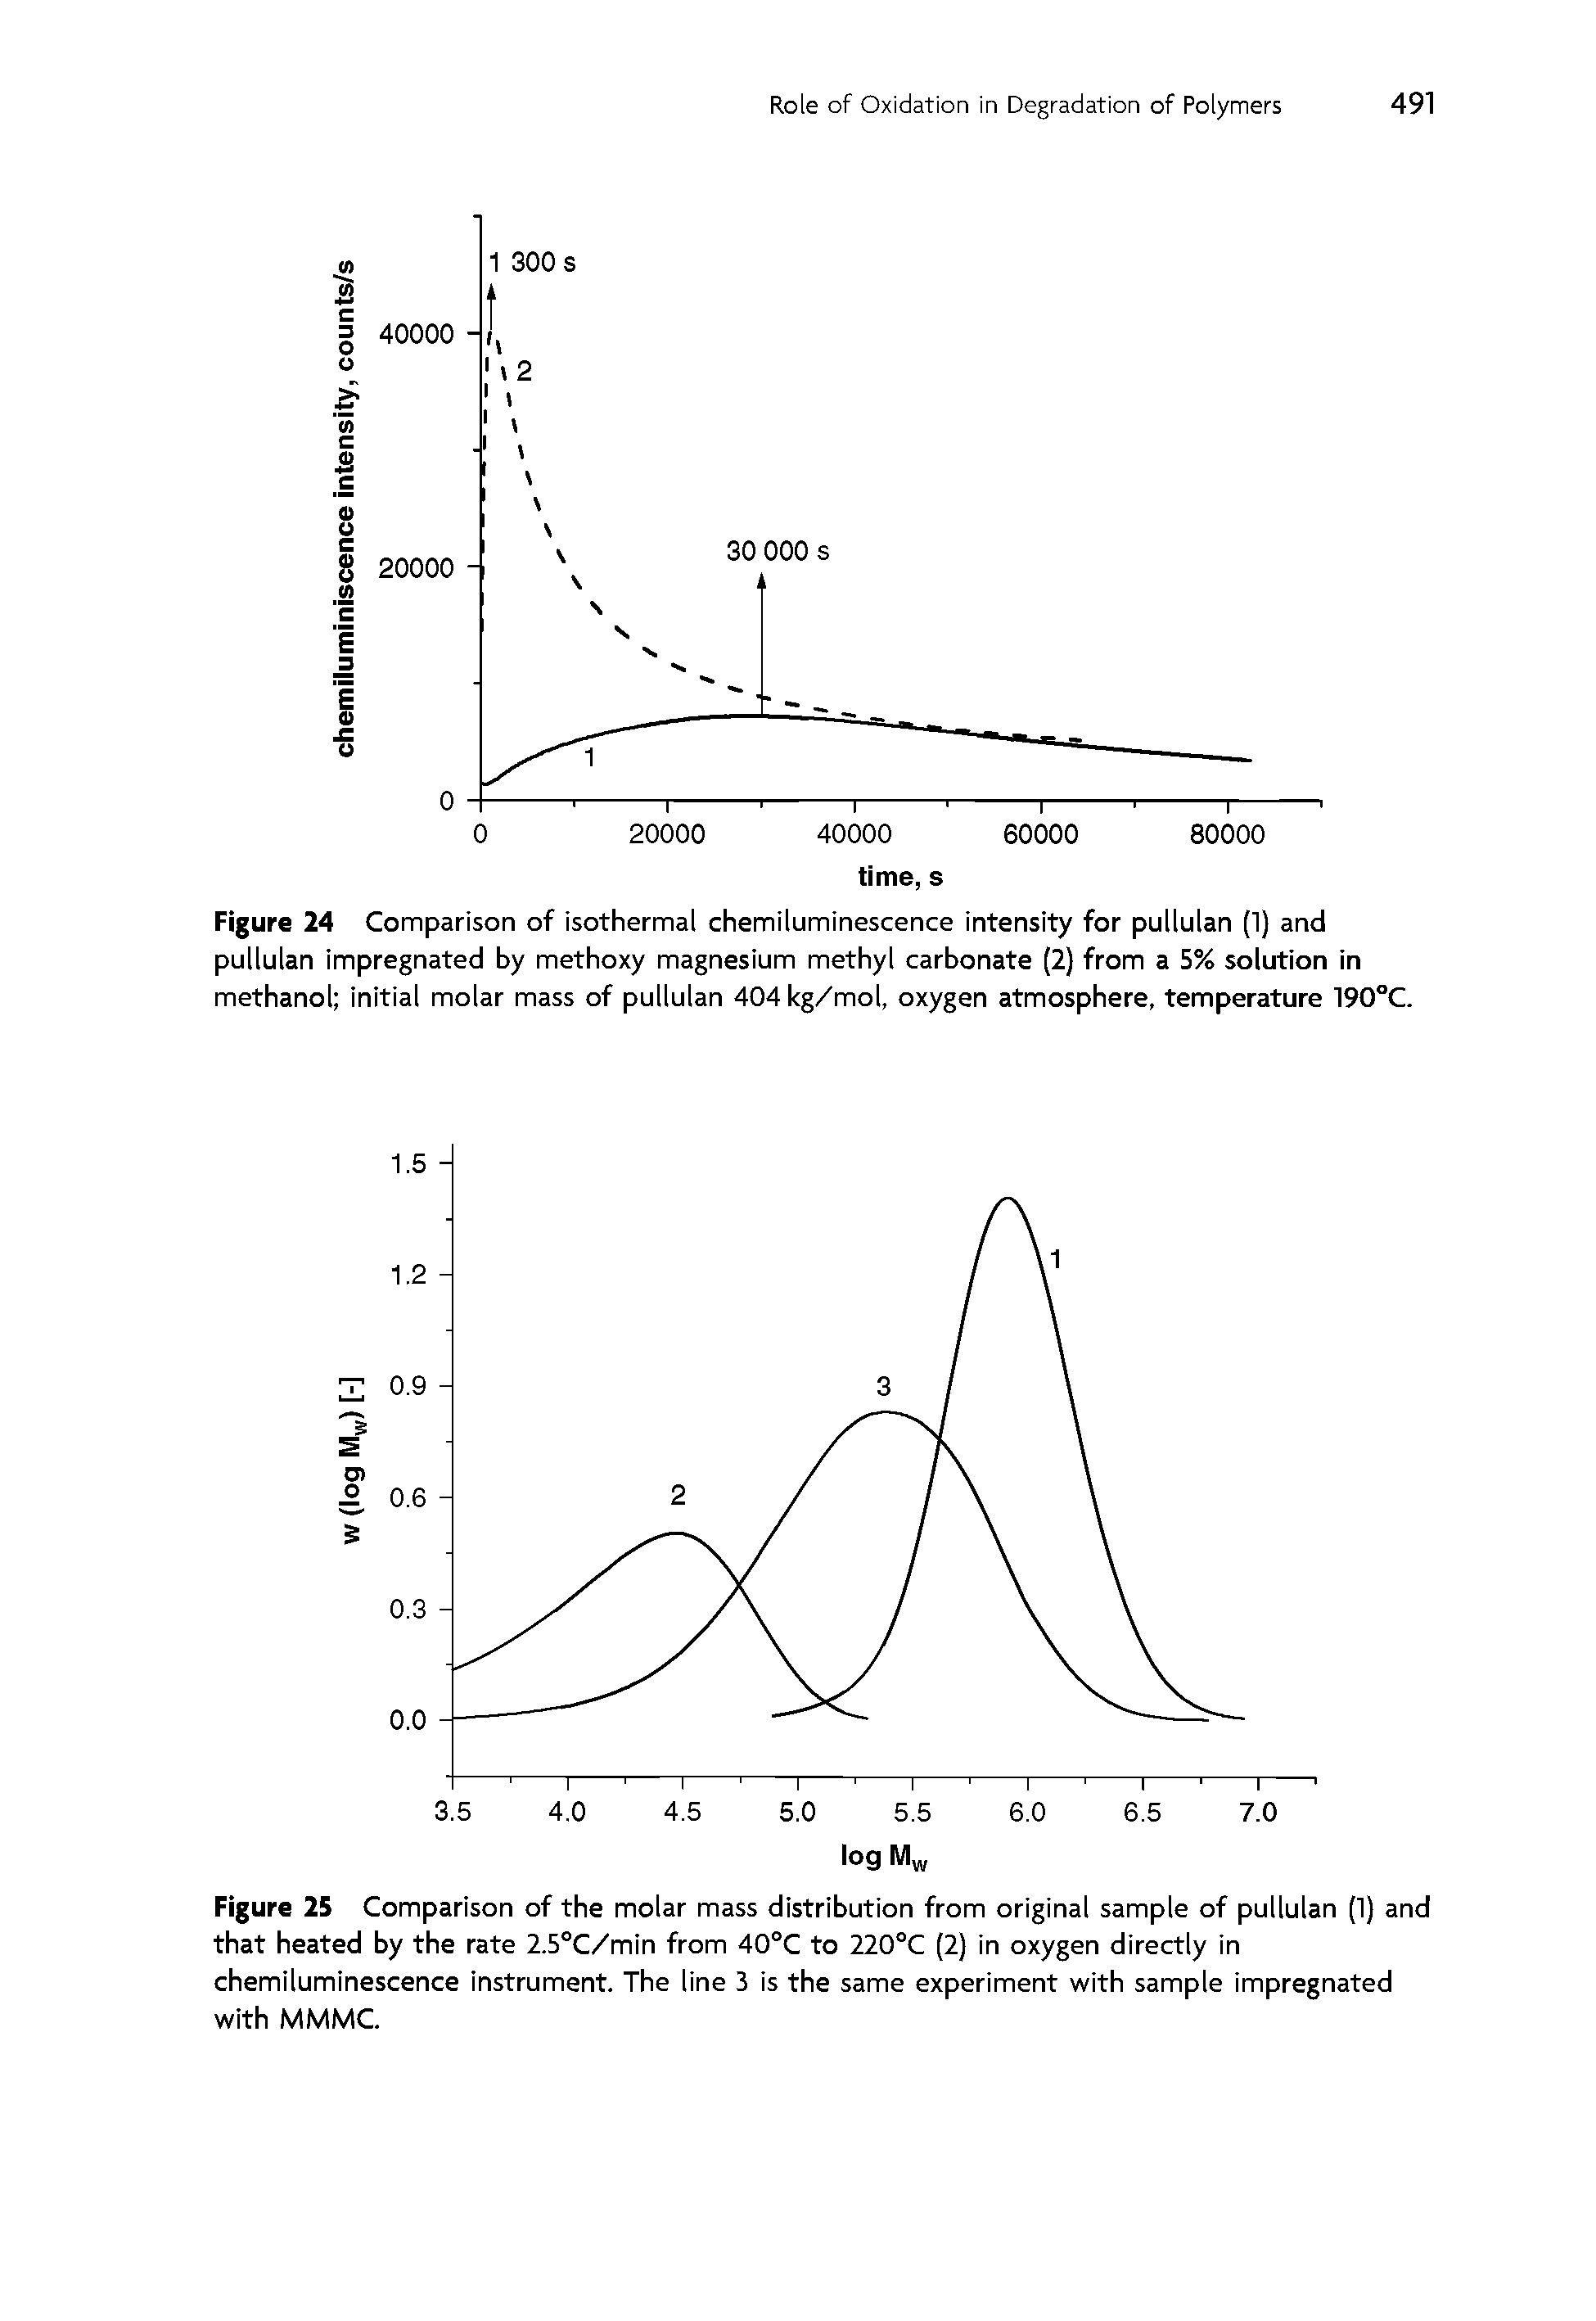 Figure 24 Comparison of isothermal chemiluminescence intensity for pullulan (1) and pullulan impregnated by methoxy magnesium methyl carbonate (2) from a 5% solution in methanol initial molar mass of pullulan 404 kg/mol, oxygen atmosphere, temperature 190°C.